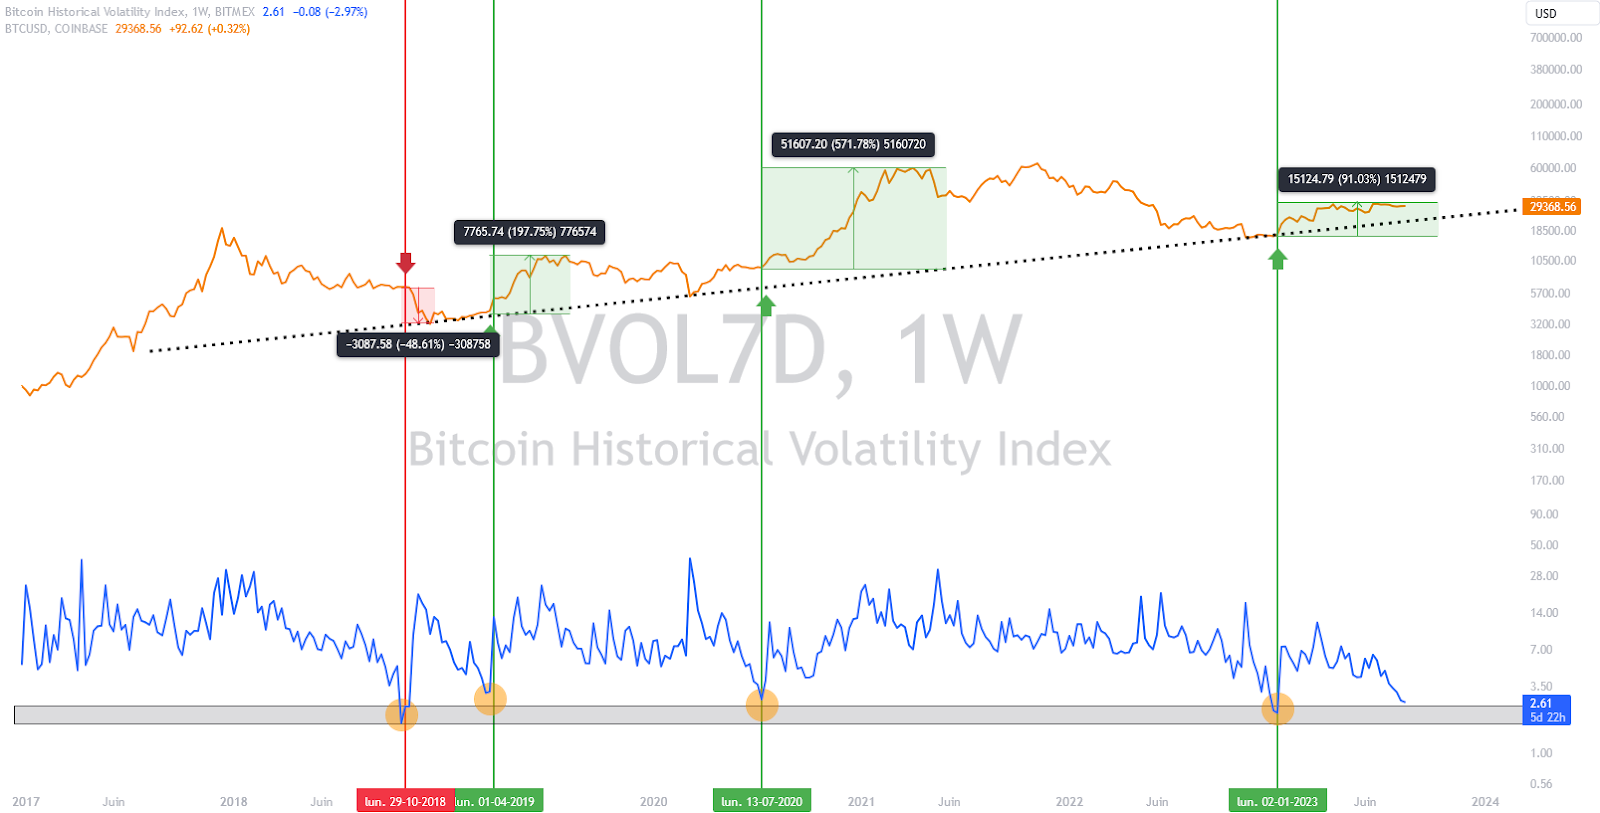 Bitcoin Historical Volatility Index 7-day chart (in blue) coupled with BTC/USD weekly chart (in orange)